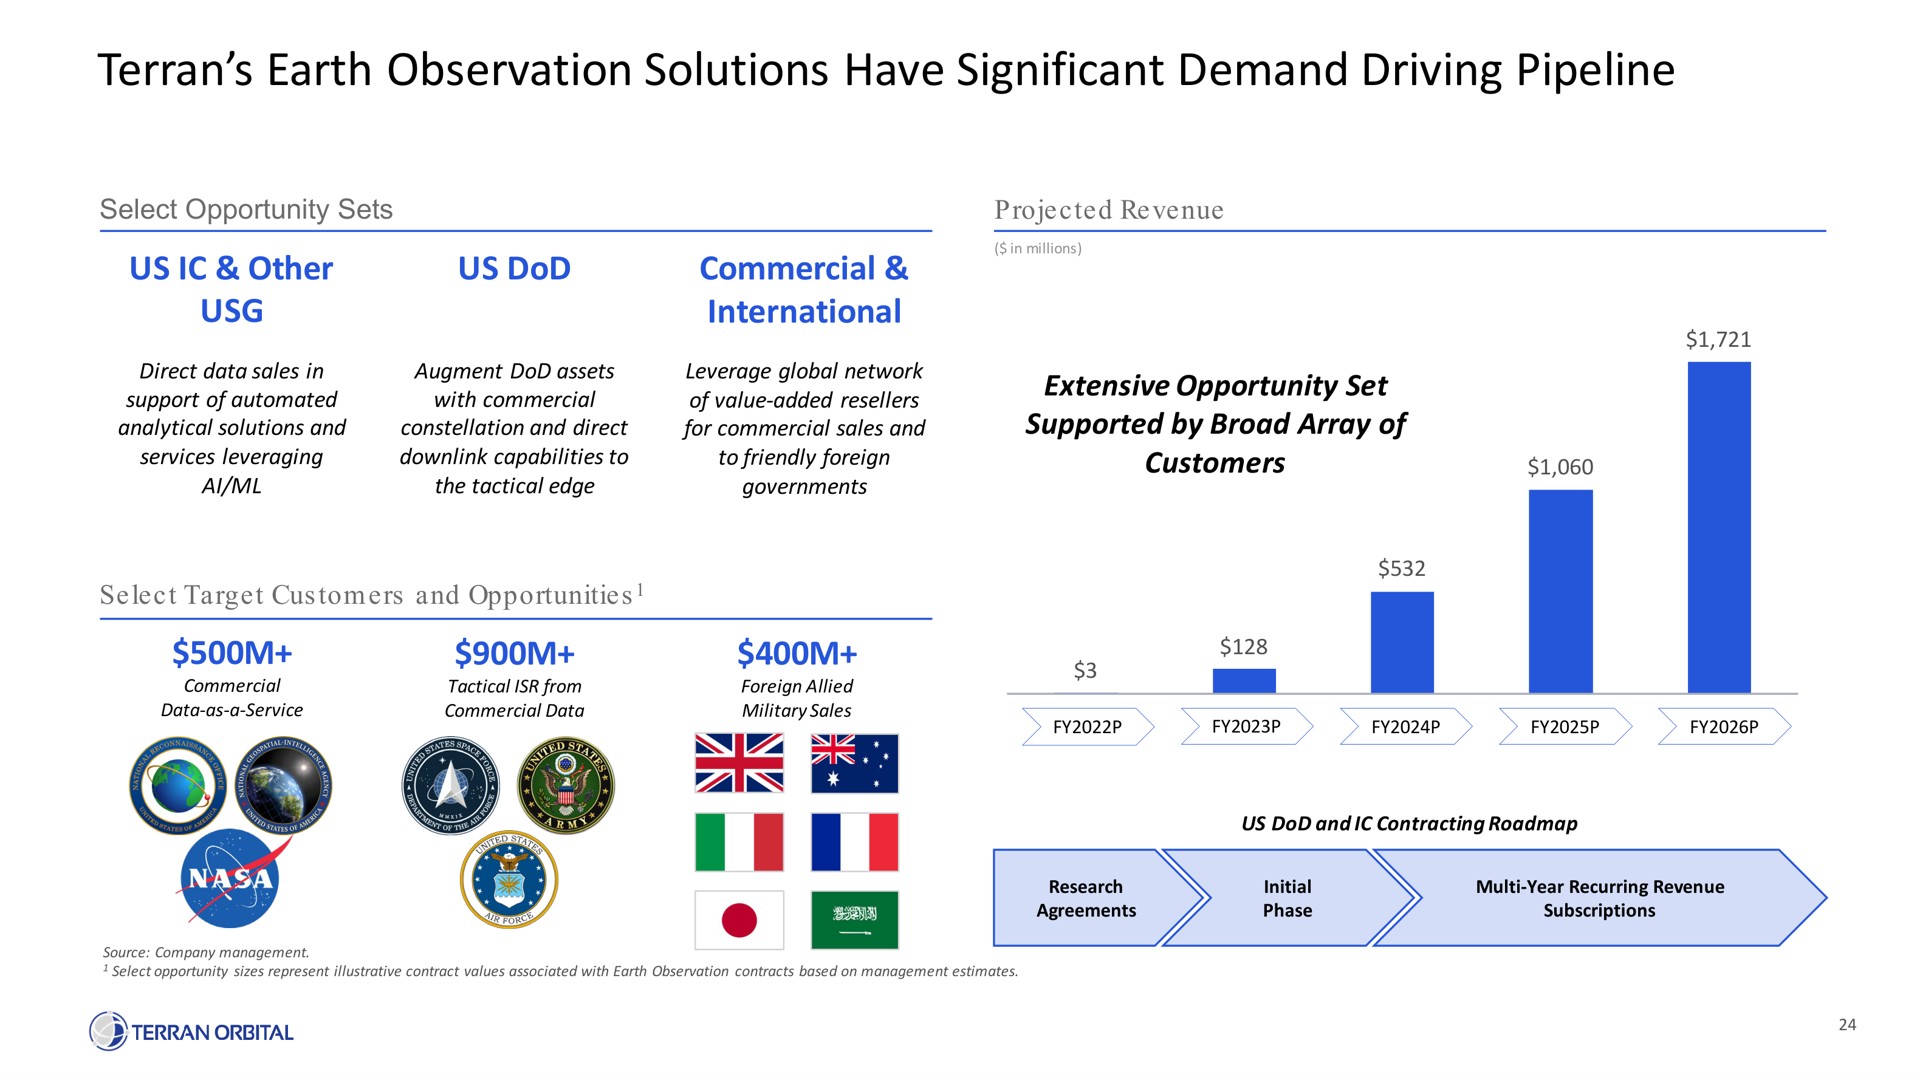 earth observation solutions have significant demand driving pipeline | Terran Orbital